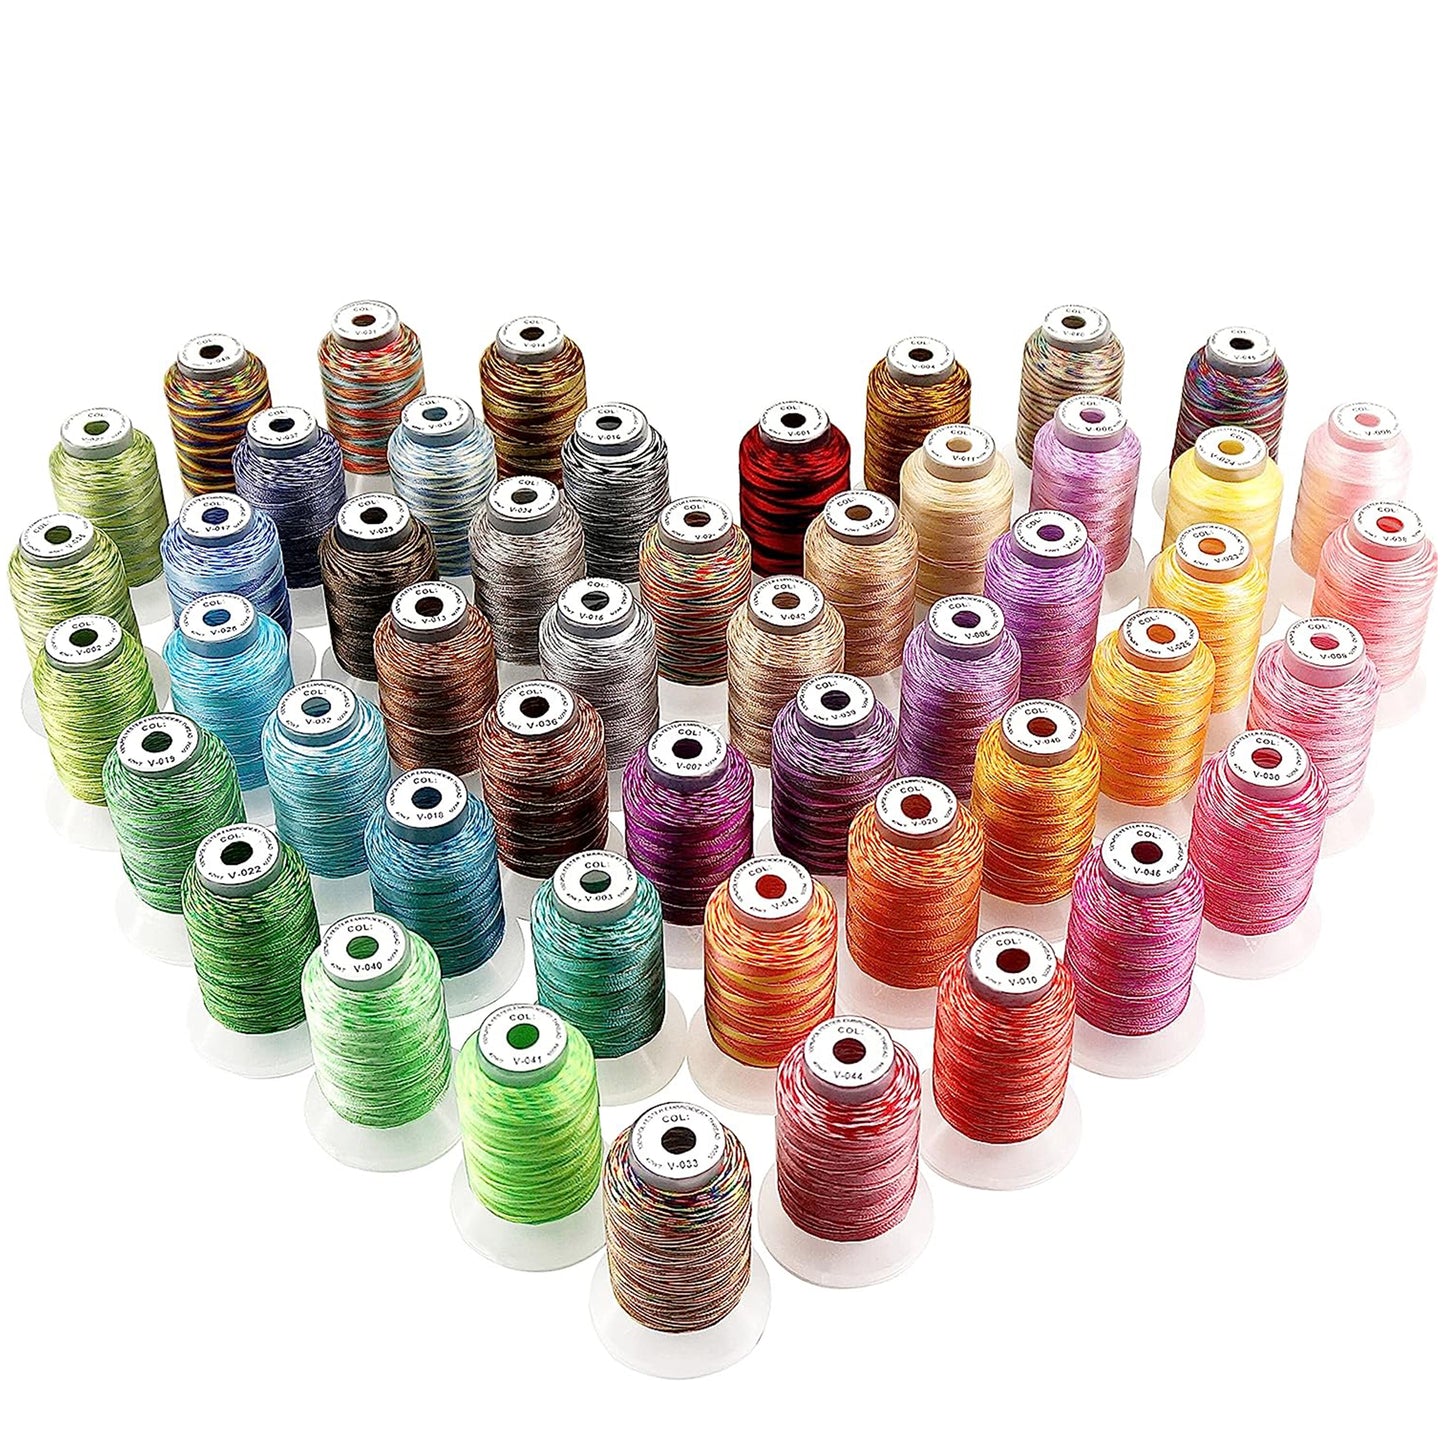 New Brothread 12 Colors Variegated Polyester Embroidery Machine